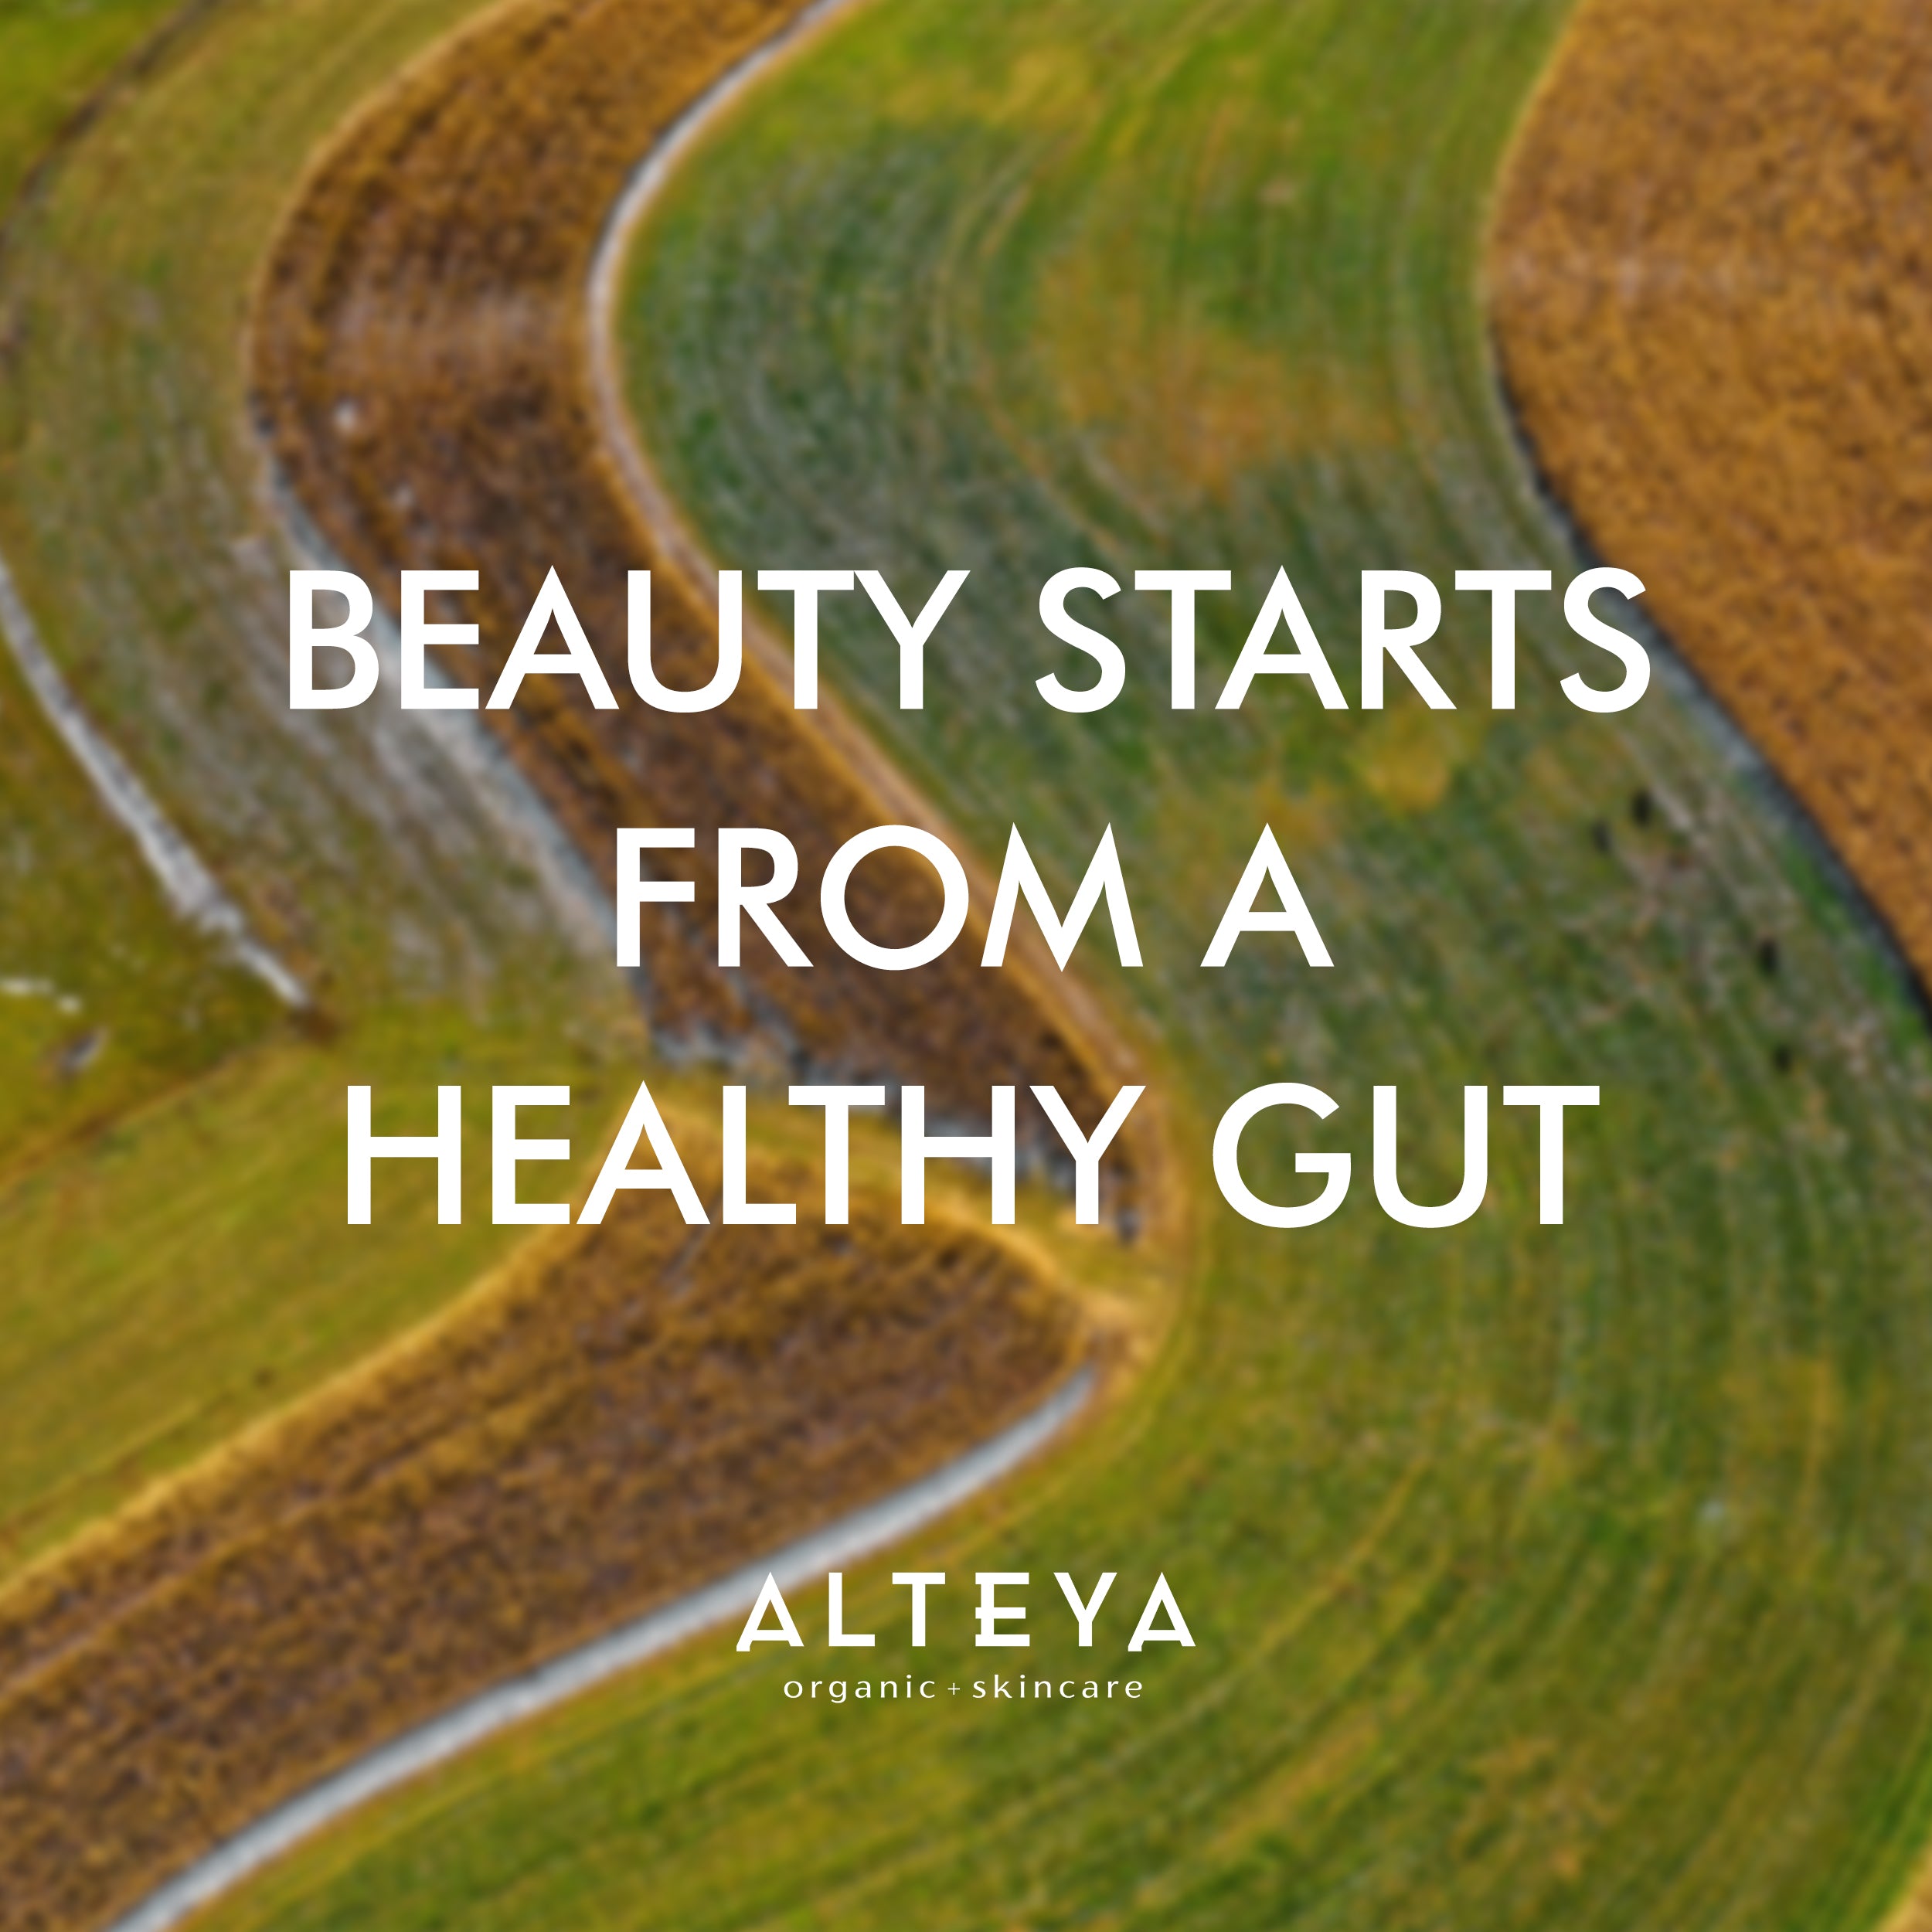 Beauty starts from a healthy gut. Improve your gut health with Rose Beauty Prebiotic and Probiotic - Synbiotic Skin & Metabolism Vegan Organic Supplement from Alteya Organics.